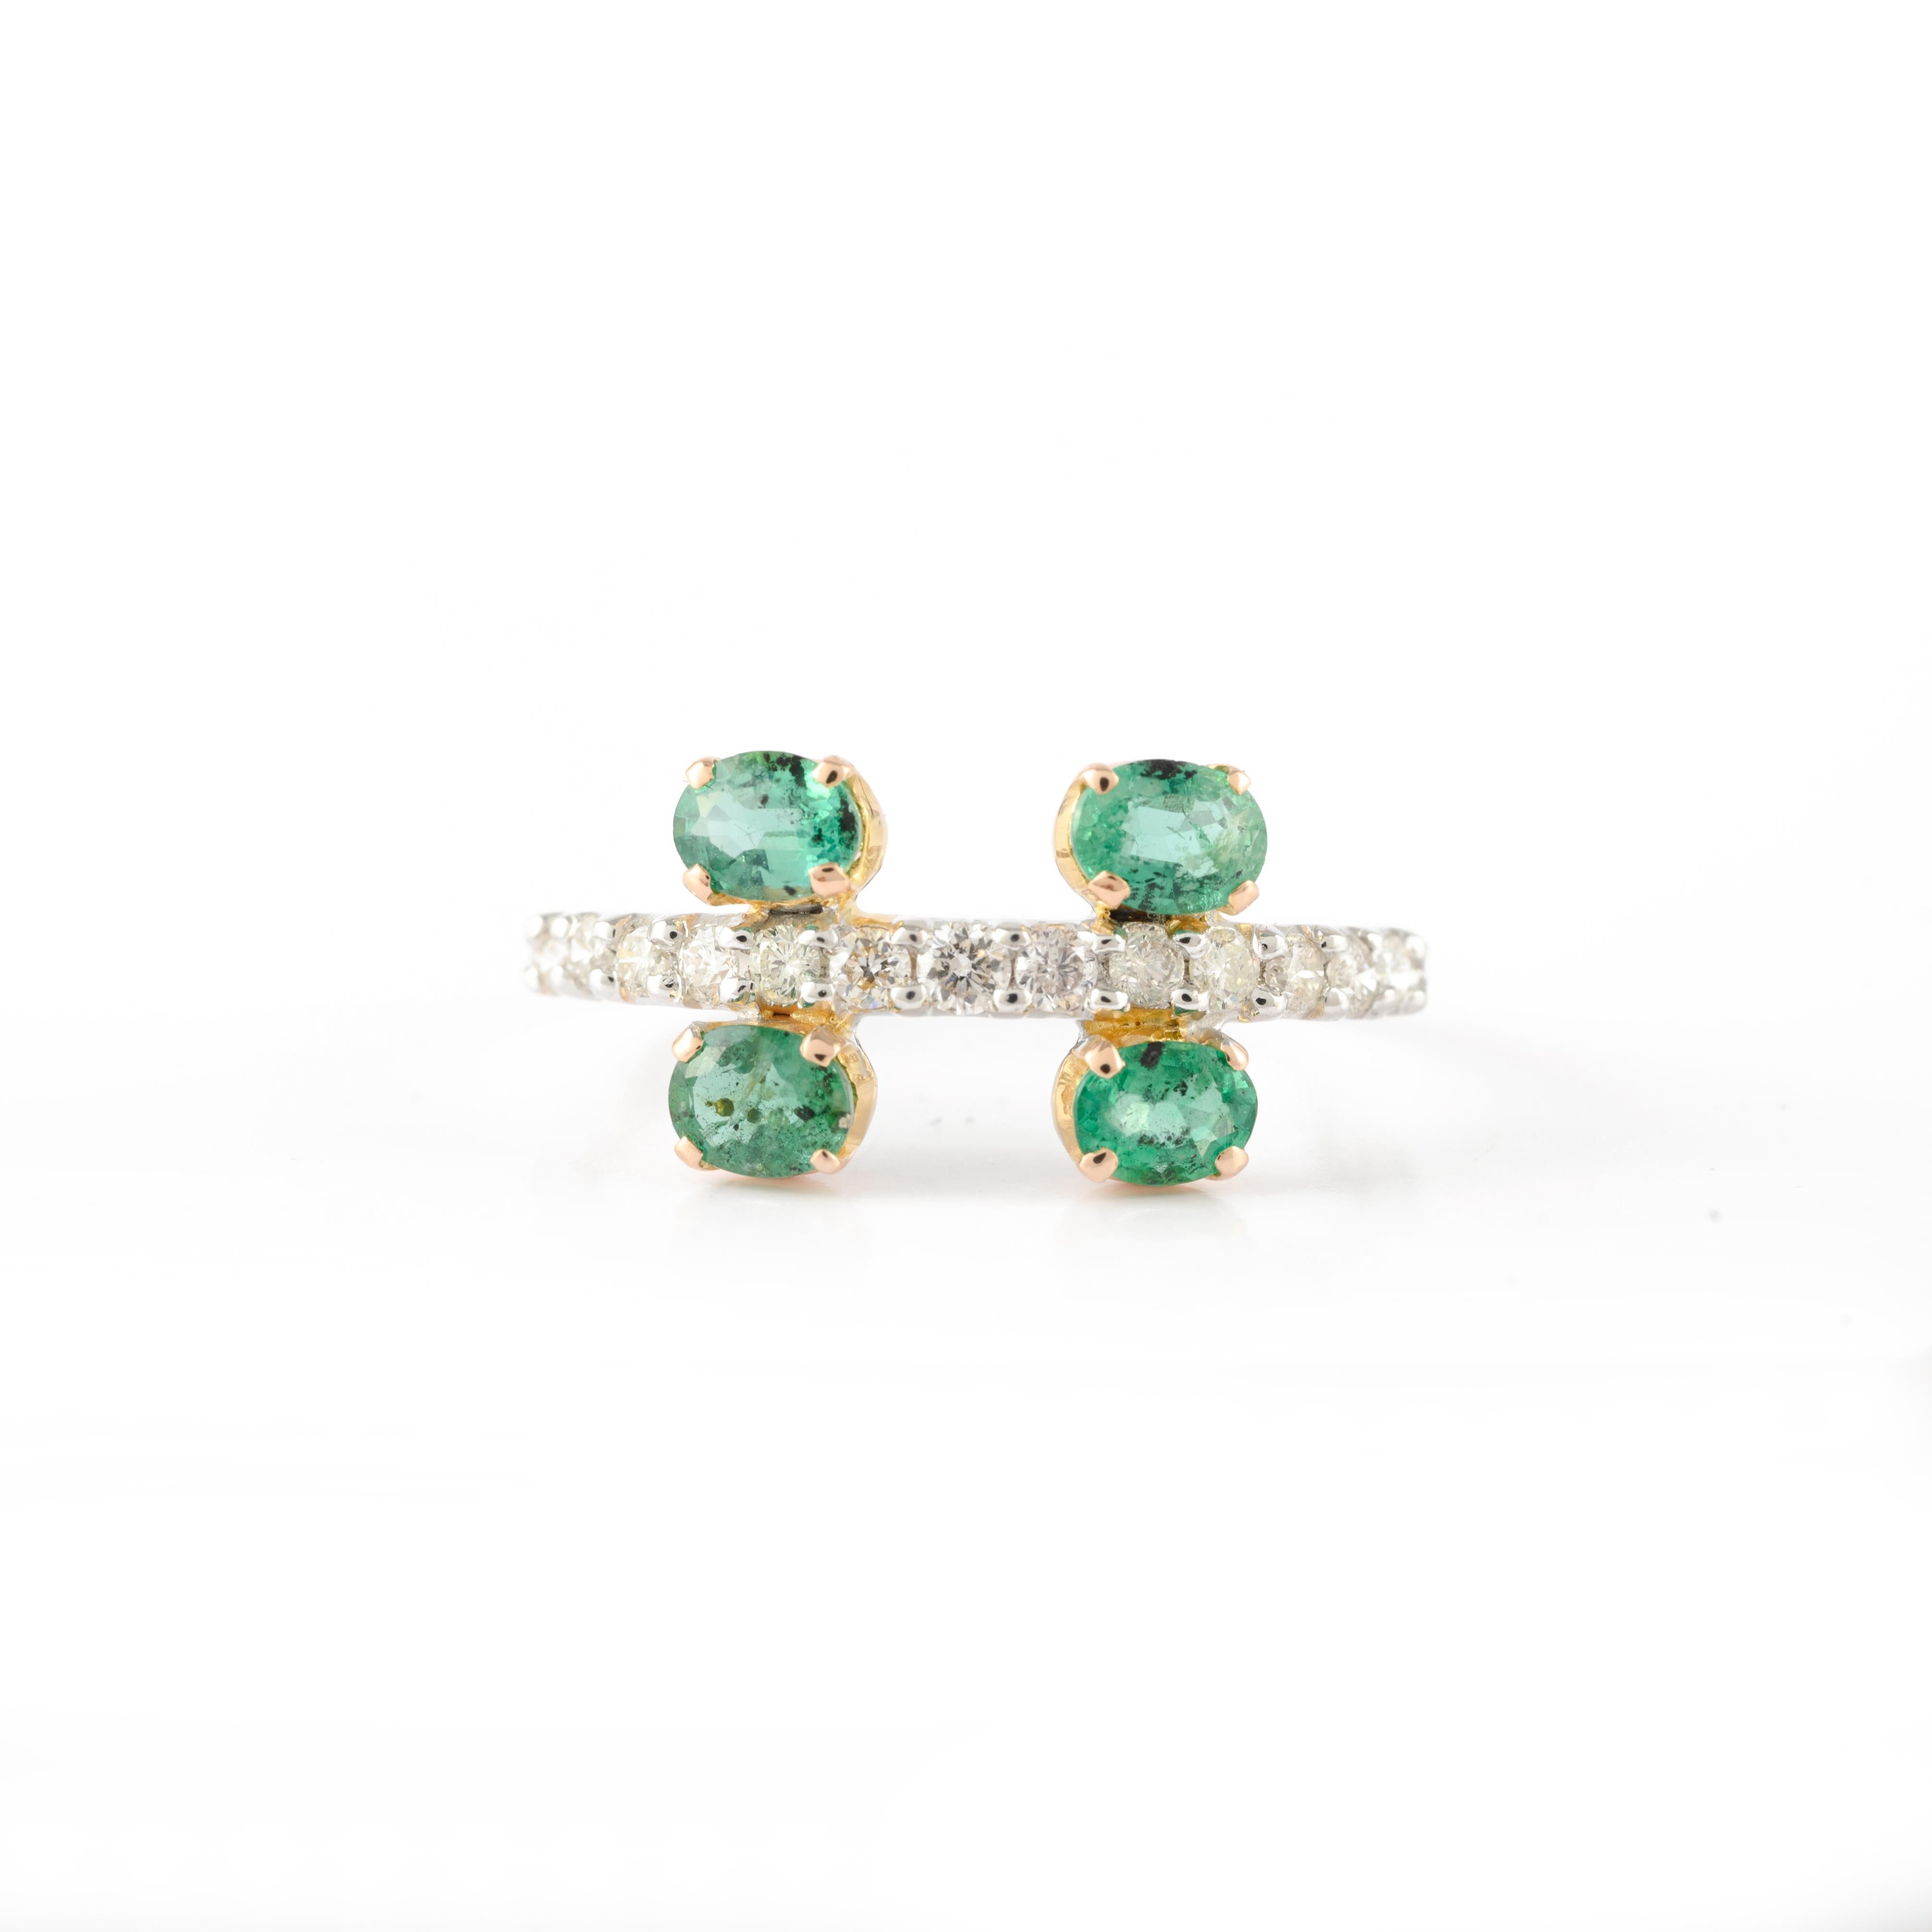 For Sale:  Delicate Diamond and Oval Cut Emerald Ring in Solid 14K Solid White Gold 3